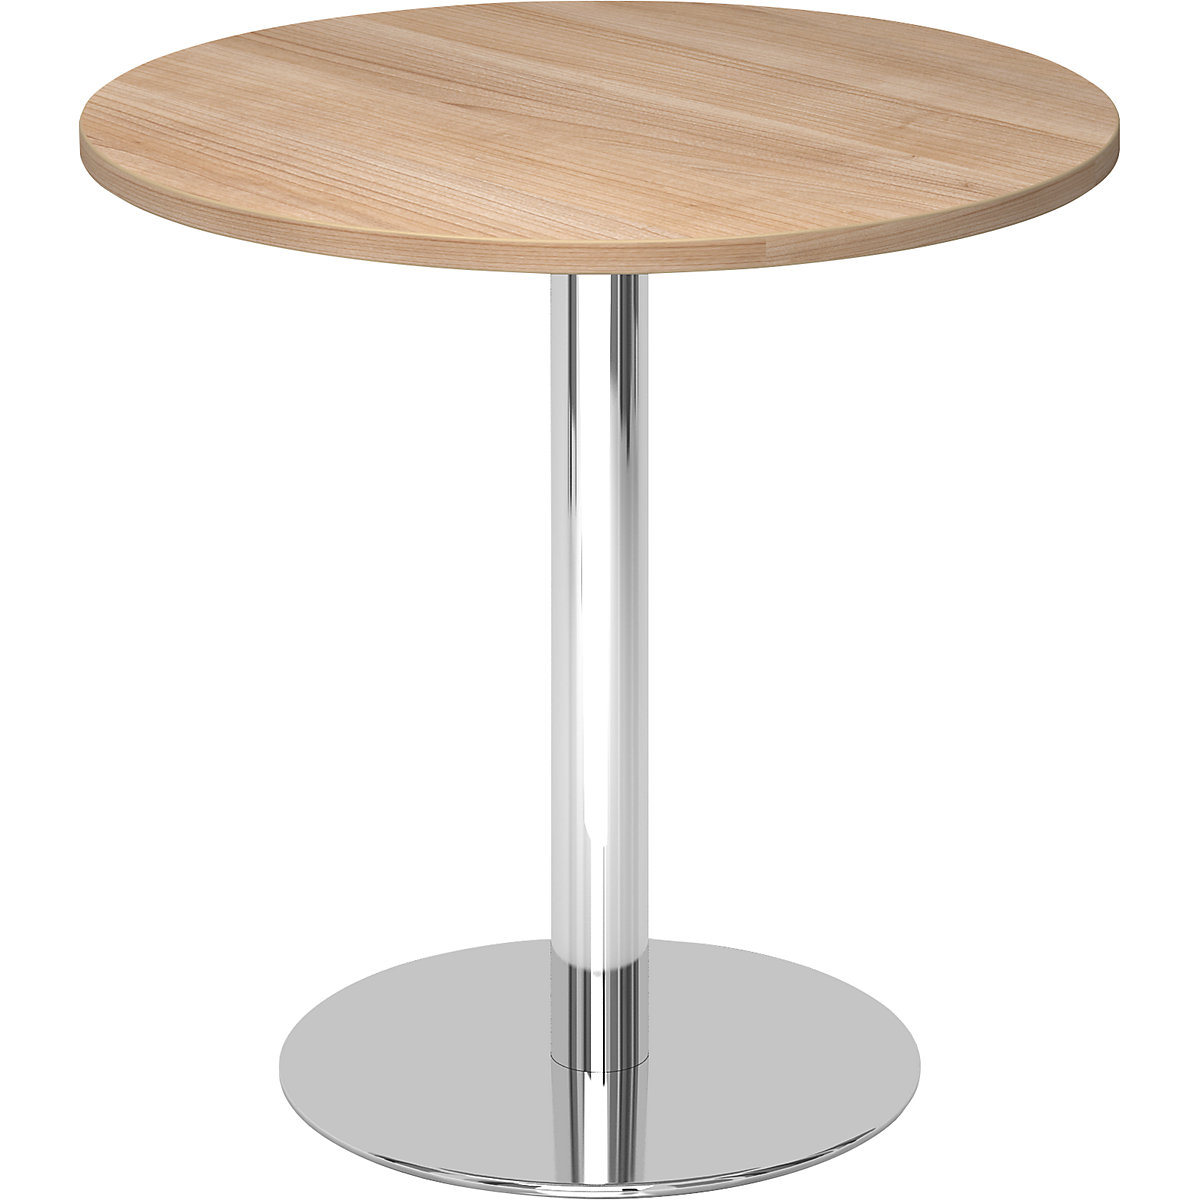 Conference table, Ø 800 mm, 755 mm high, chrome plated frame, tabletop in walnut finish-4